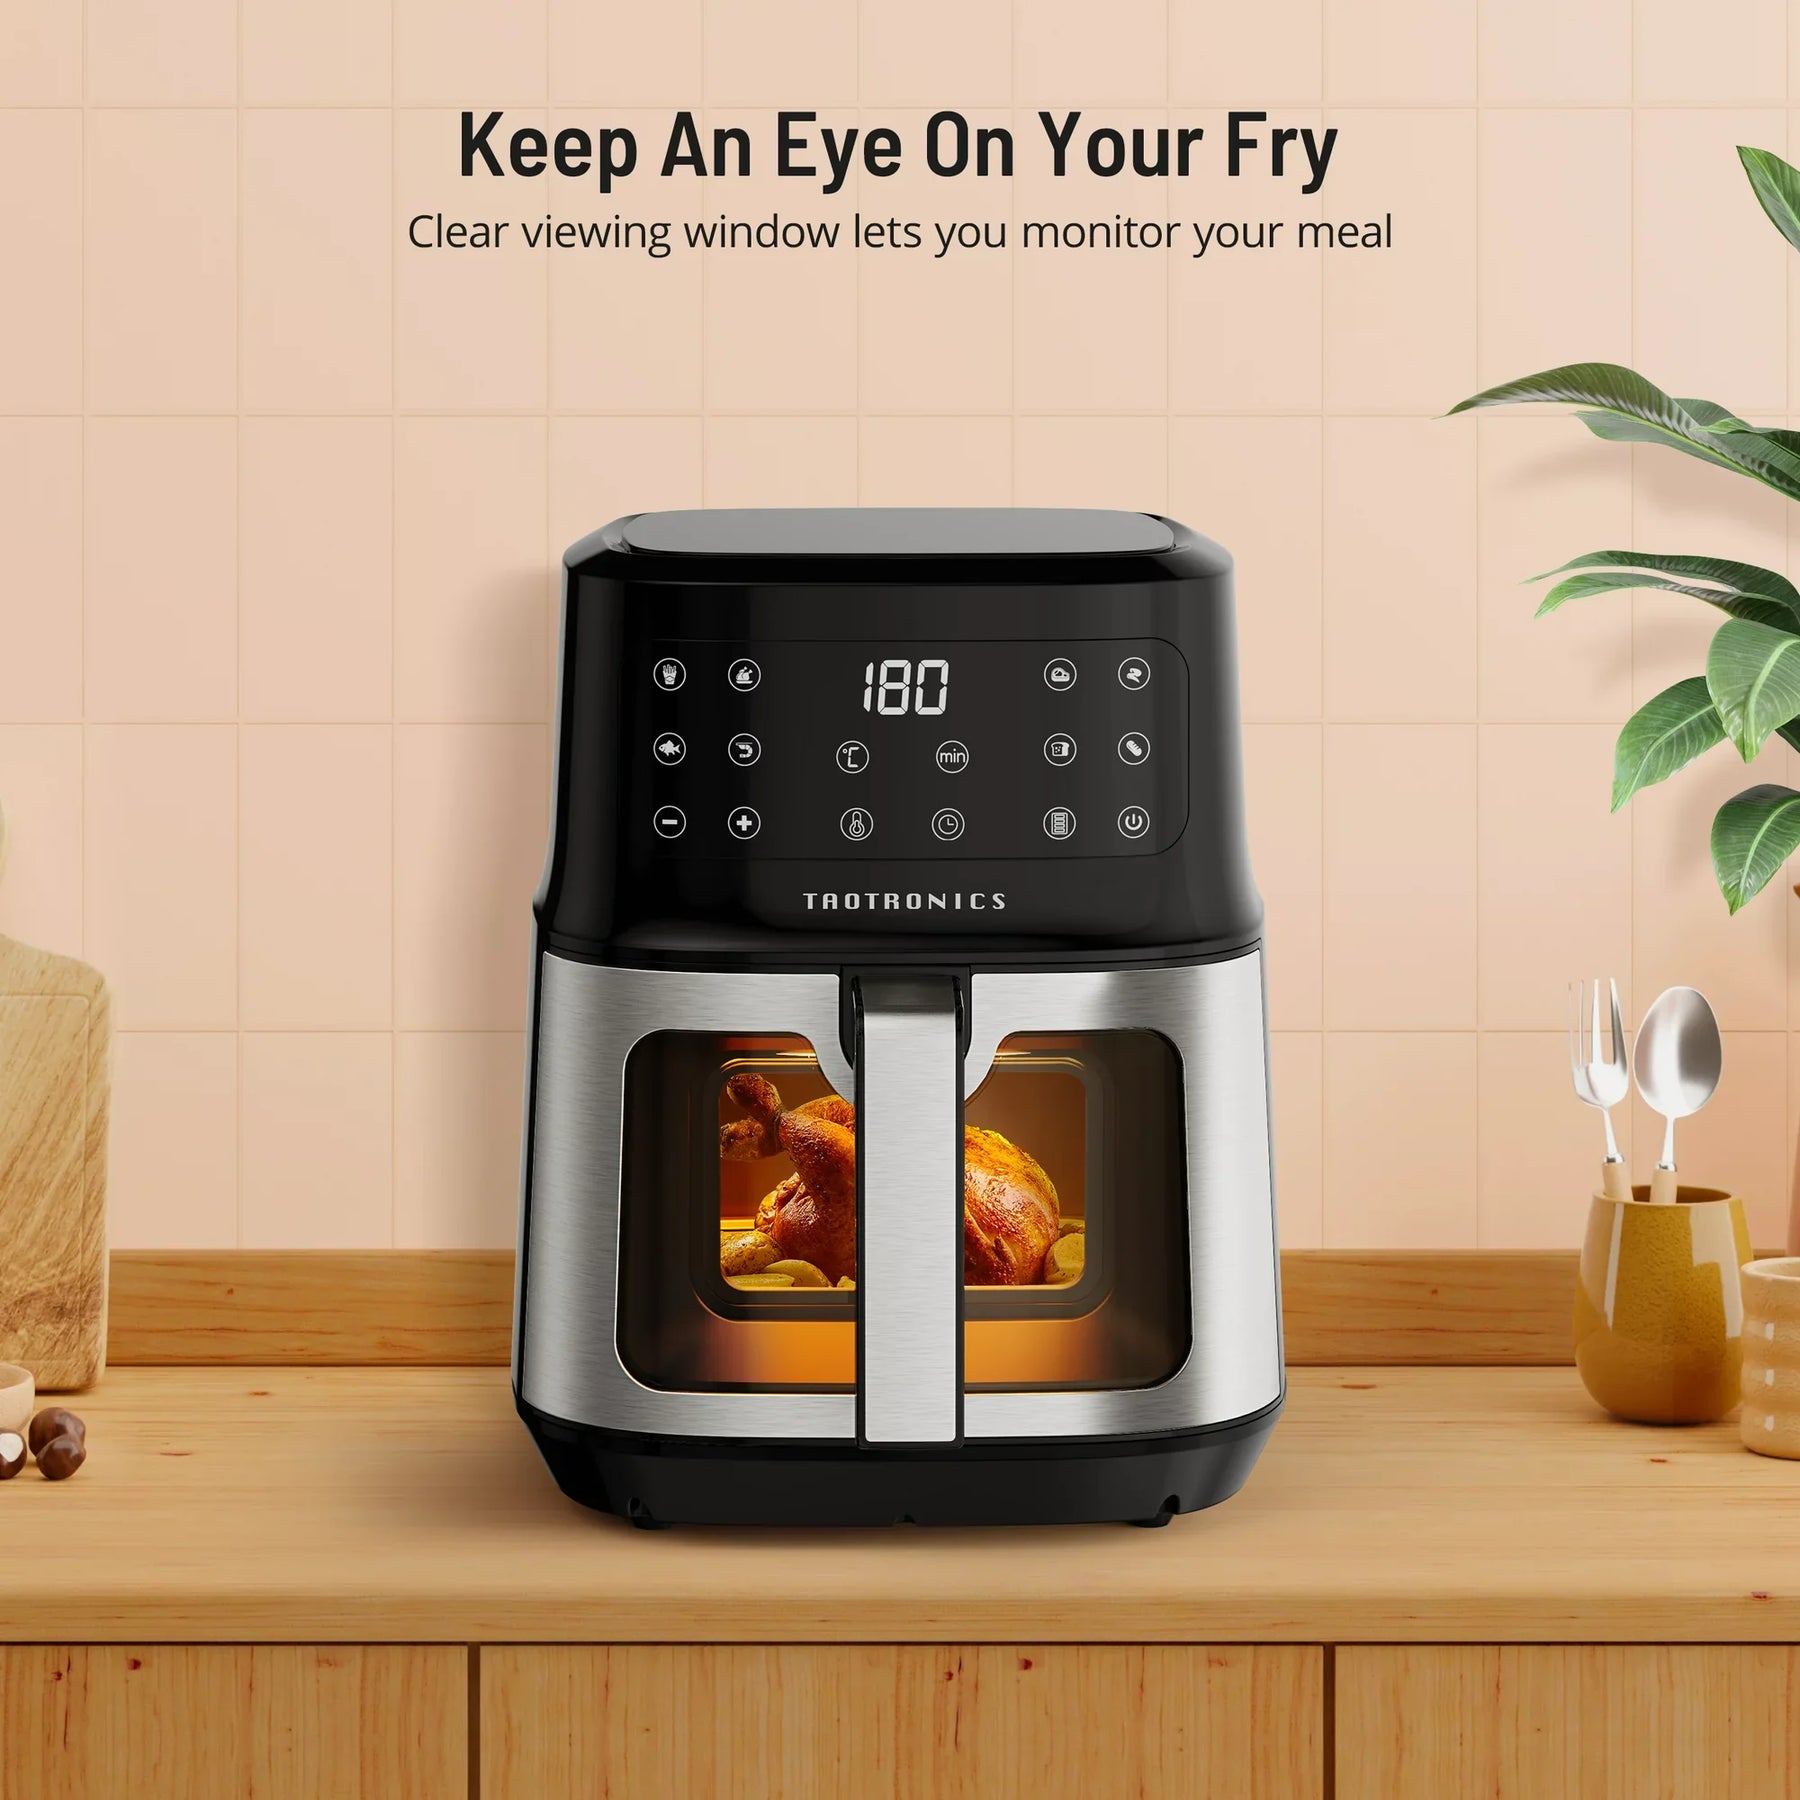 The Best Air Fryer 2021  Air Fryer Oven with Viewing Window 